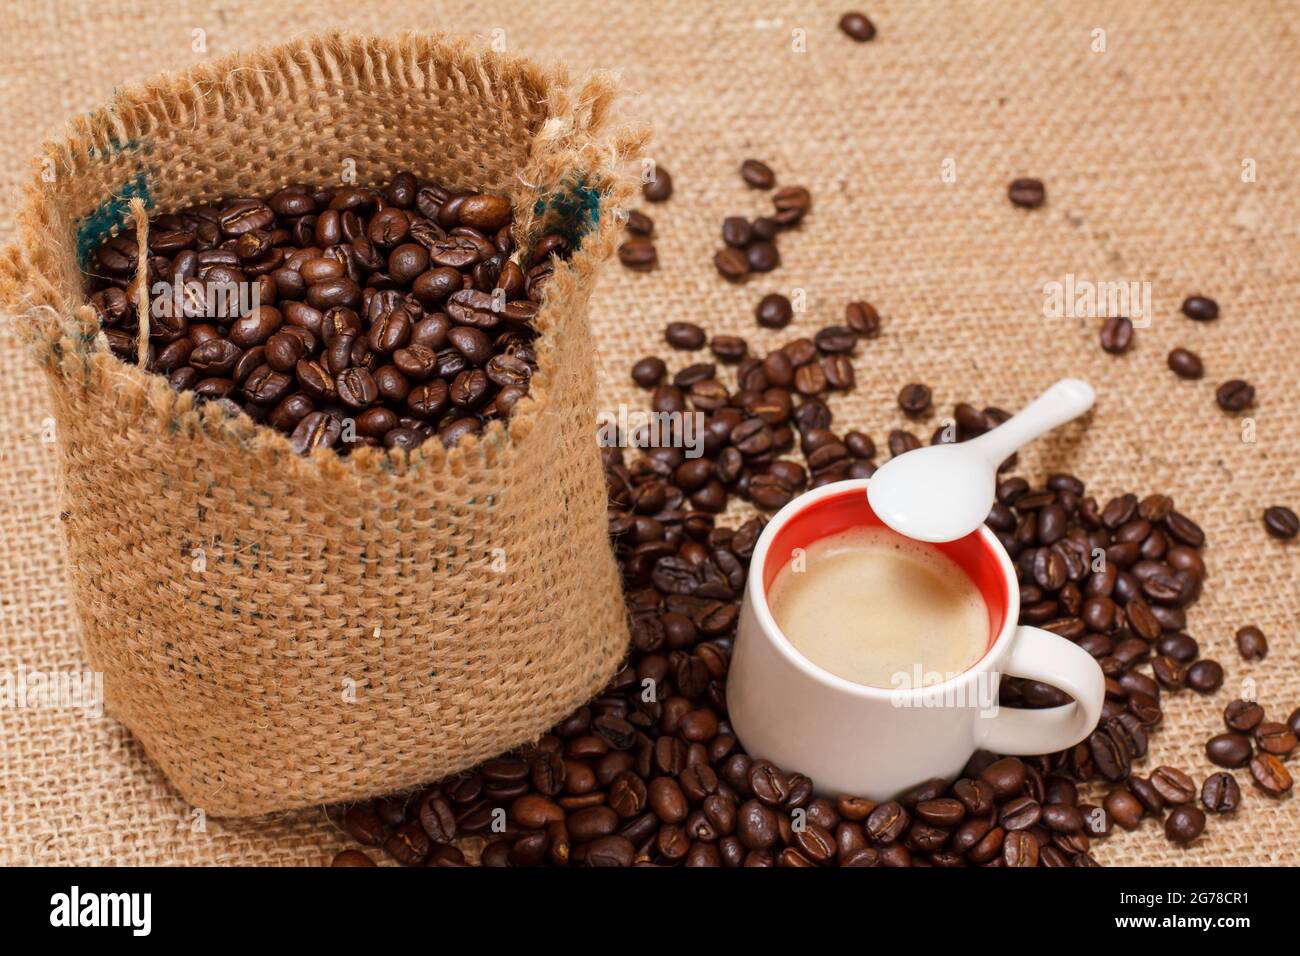 Roasted coffee beans in a canvas sack and cup of coffee. Stock Photo